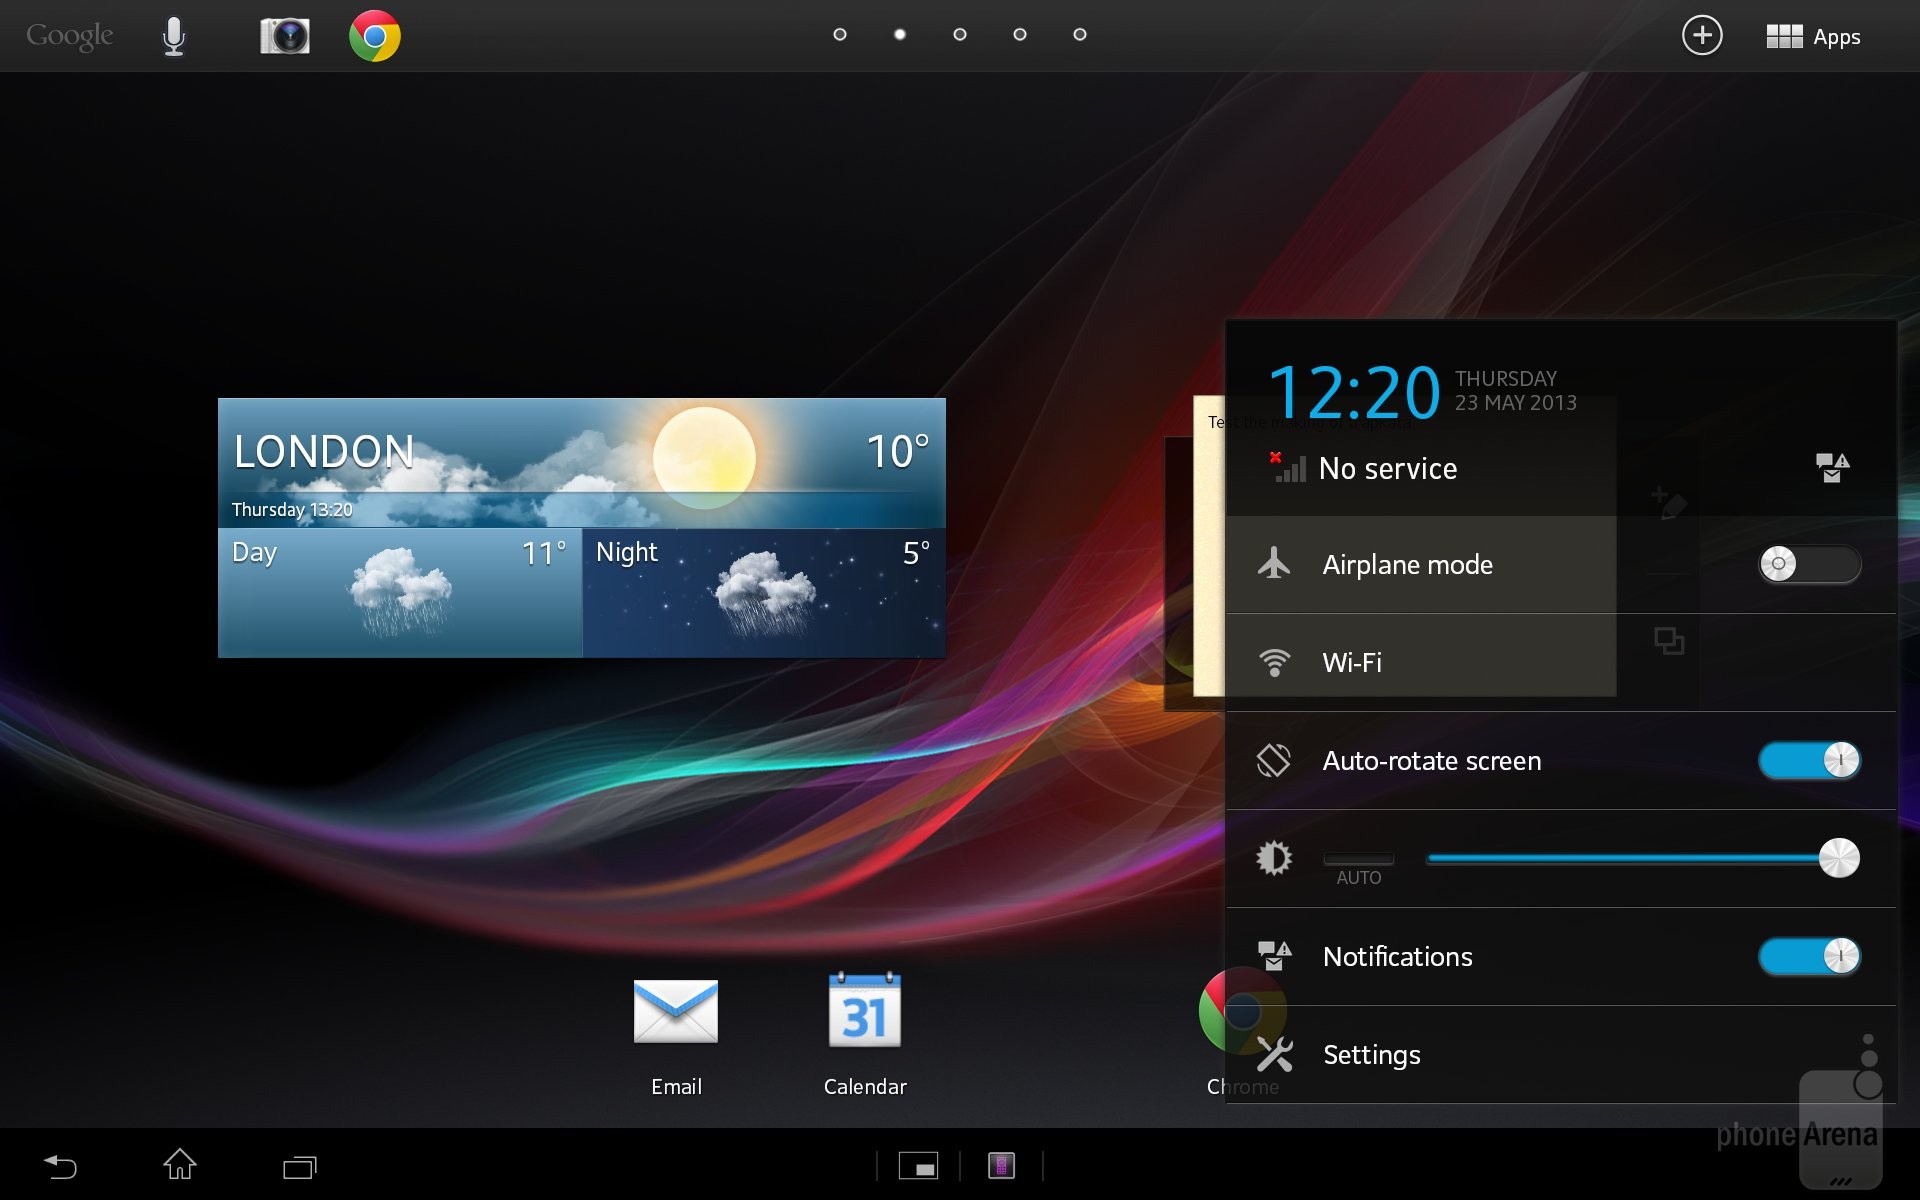 Sony's tablet Xperia UI is painted all over Android 4.1.2 on the Tablet Z